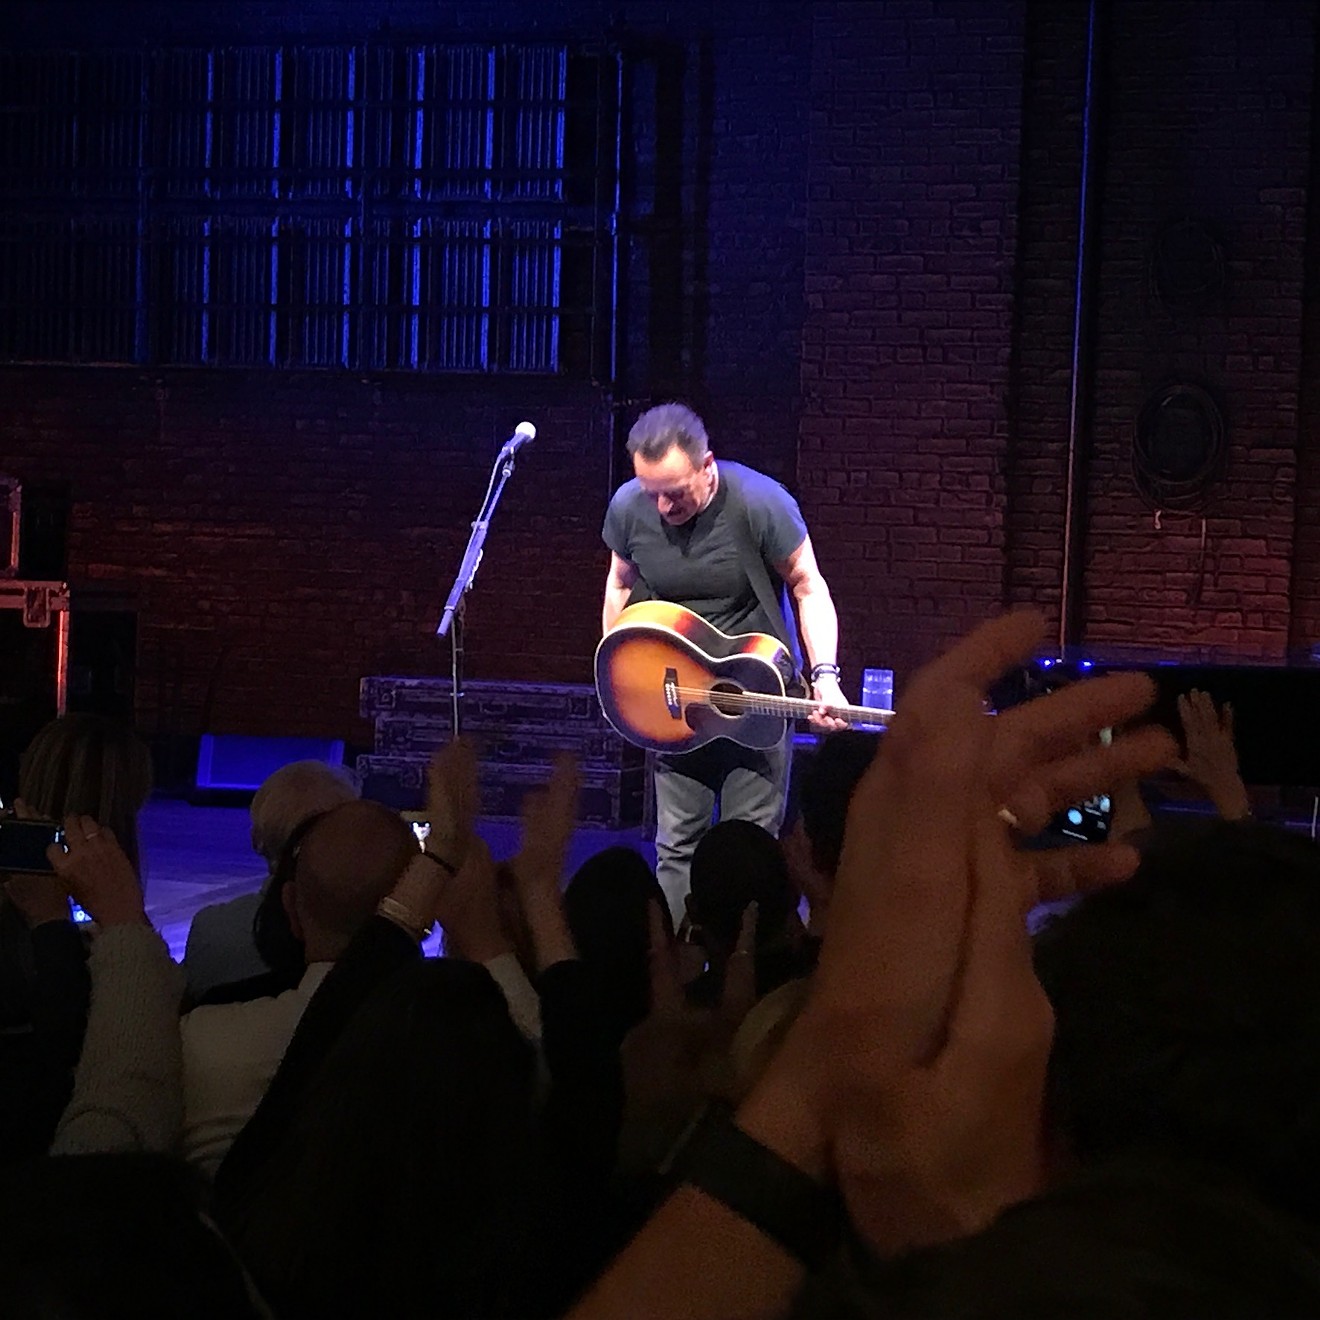 Bruce Springsteen invites audience members to take photos after his Broadway performances.